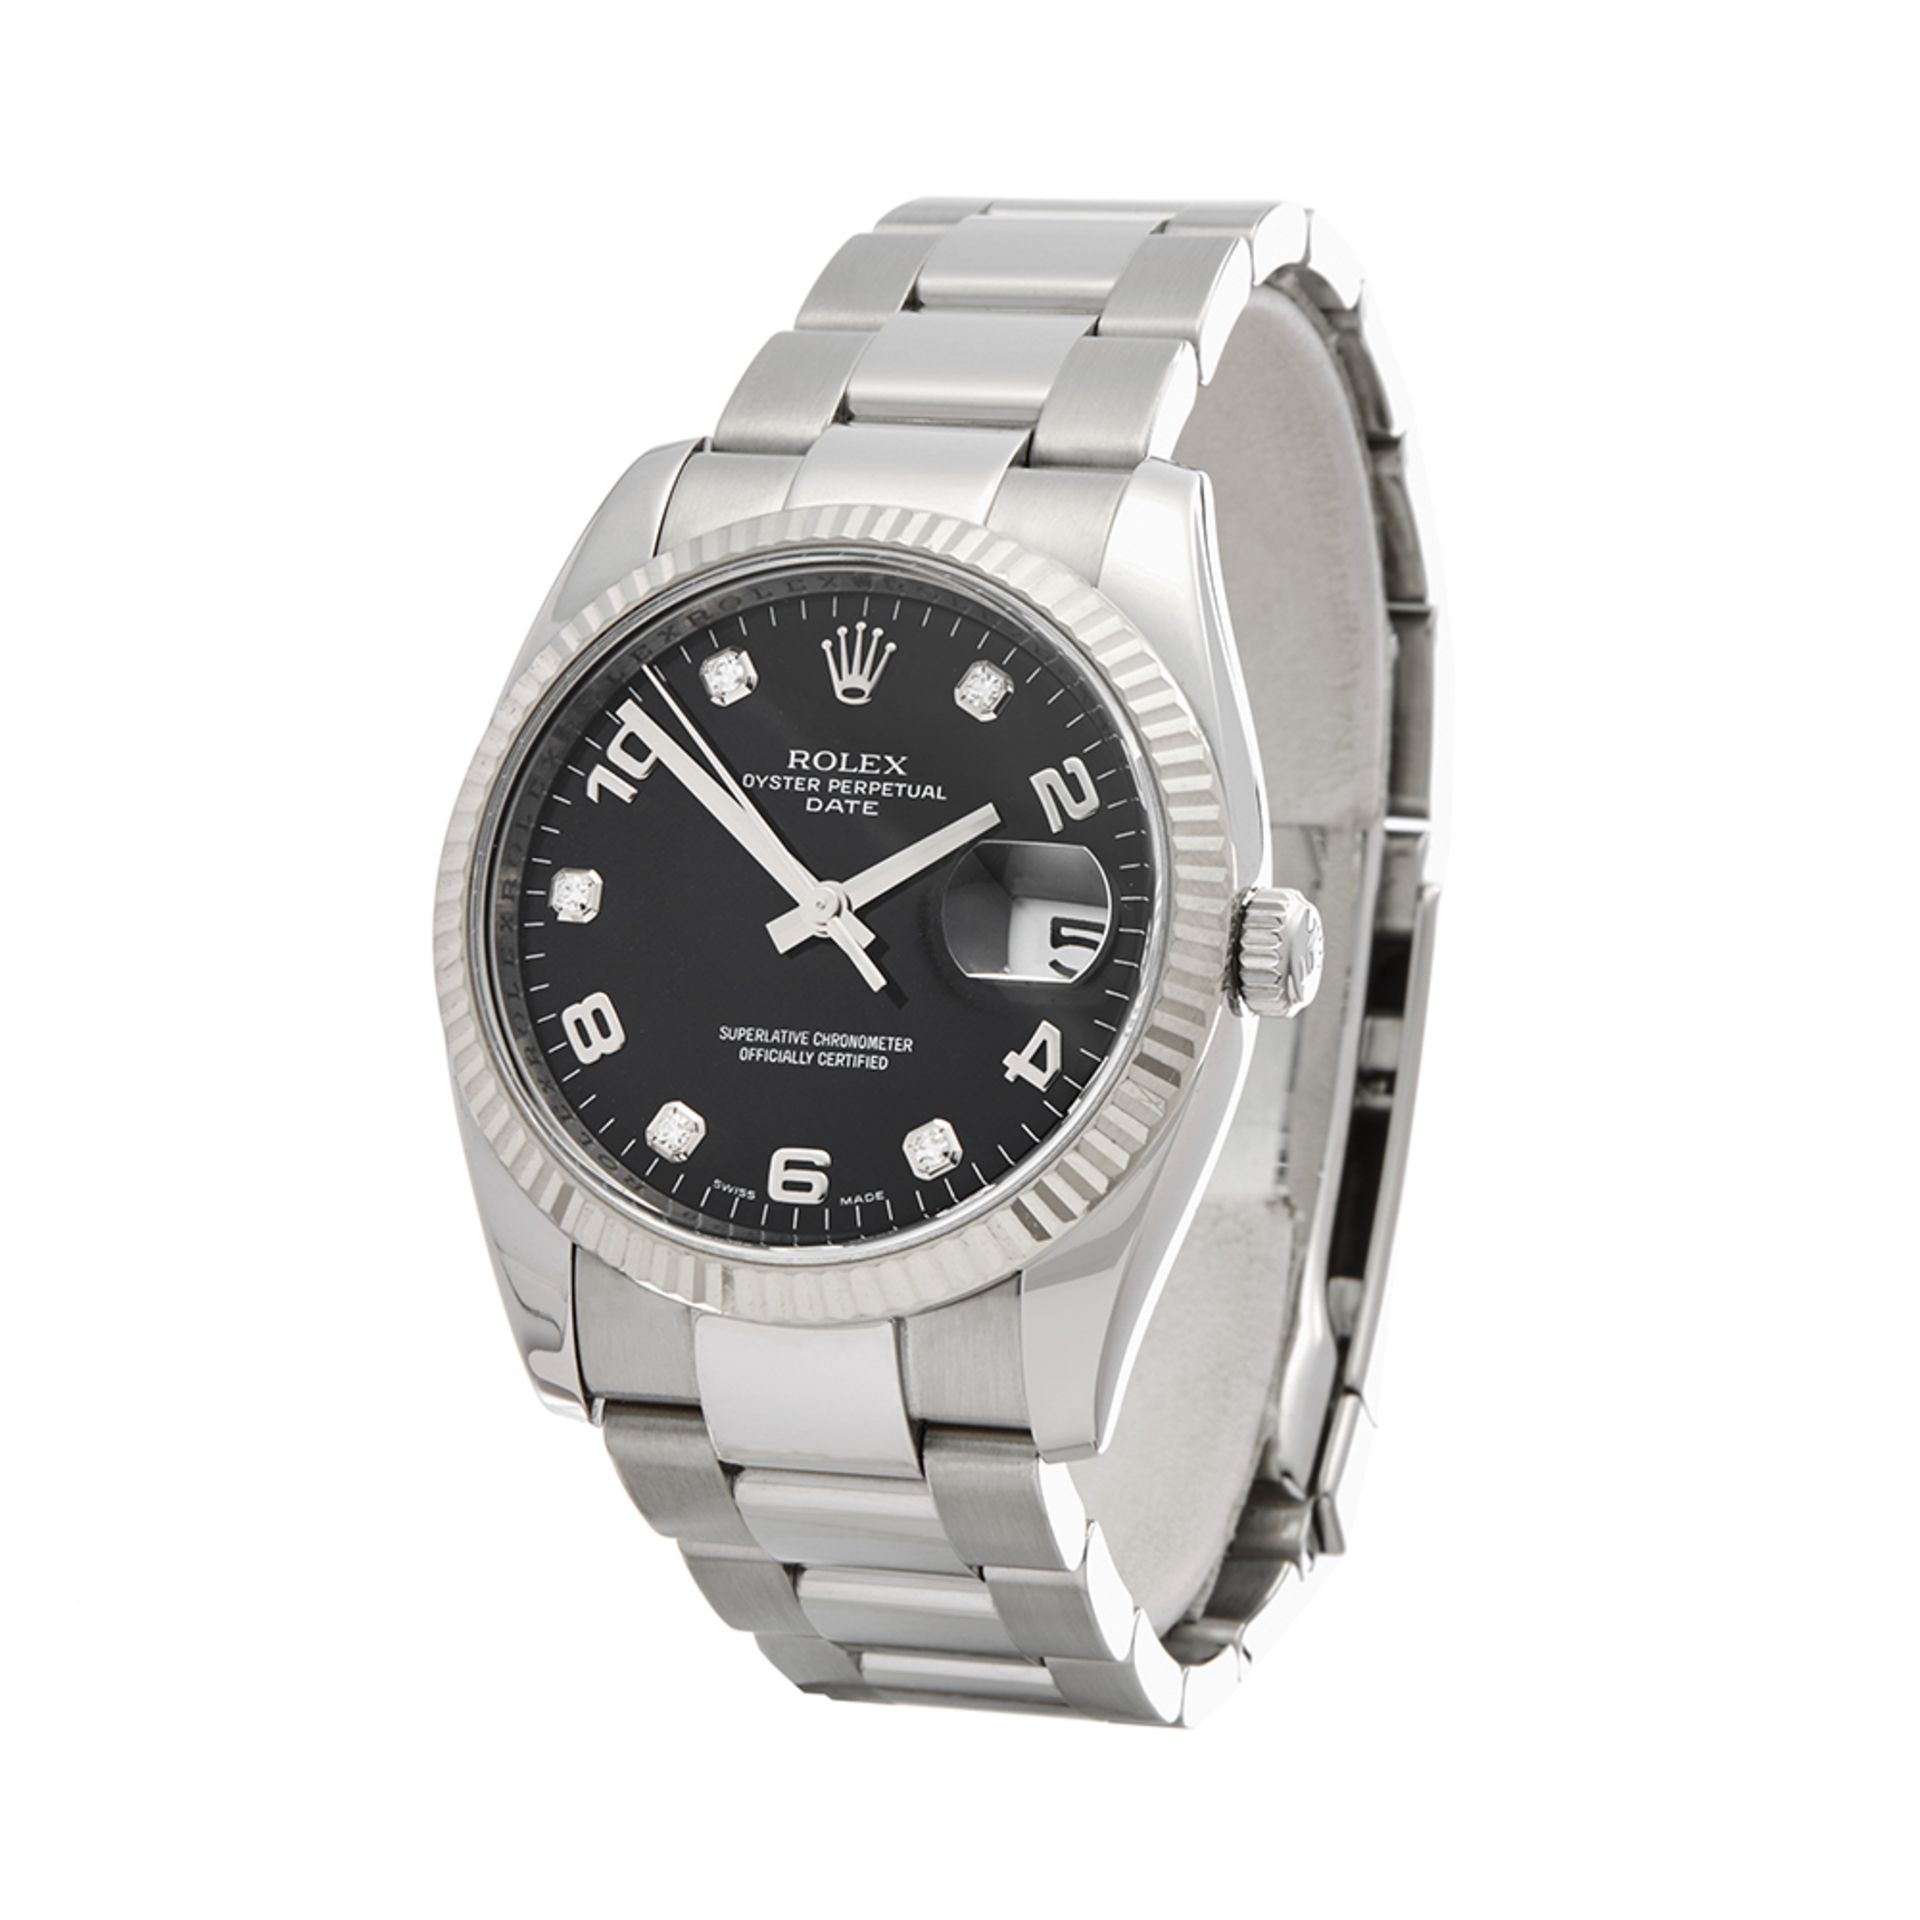 Rolex Oyster Perpetual Date 34mm Stainless Steel - 115234 - Image 3 of 8